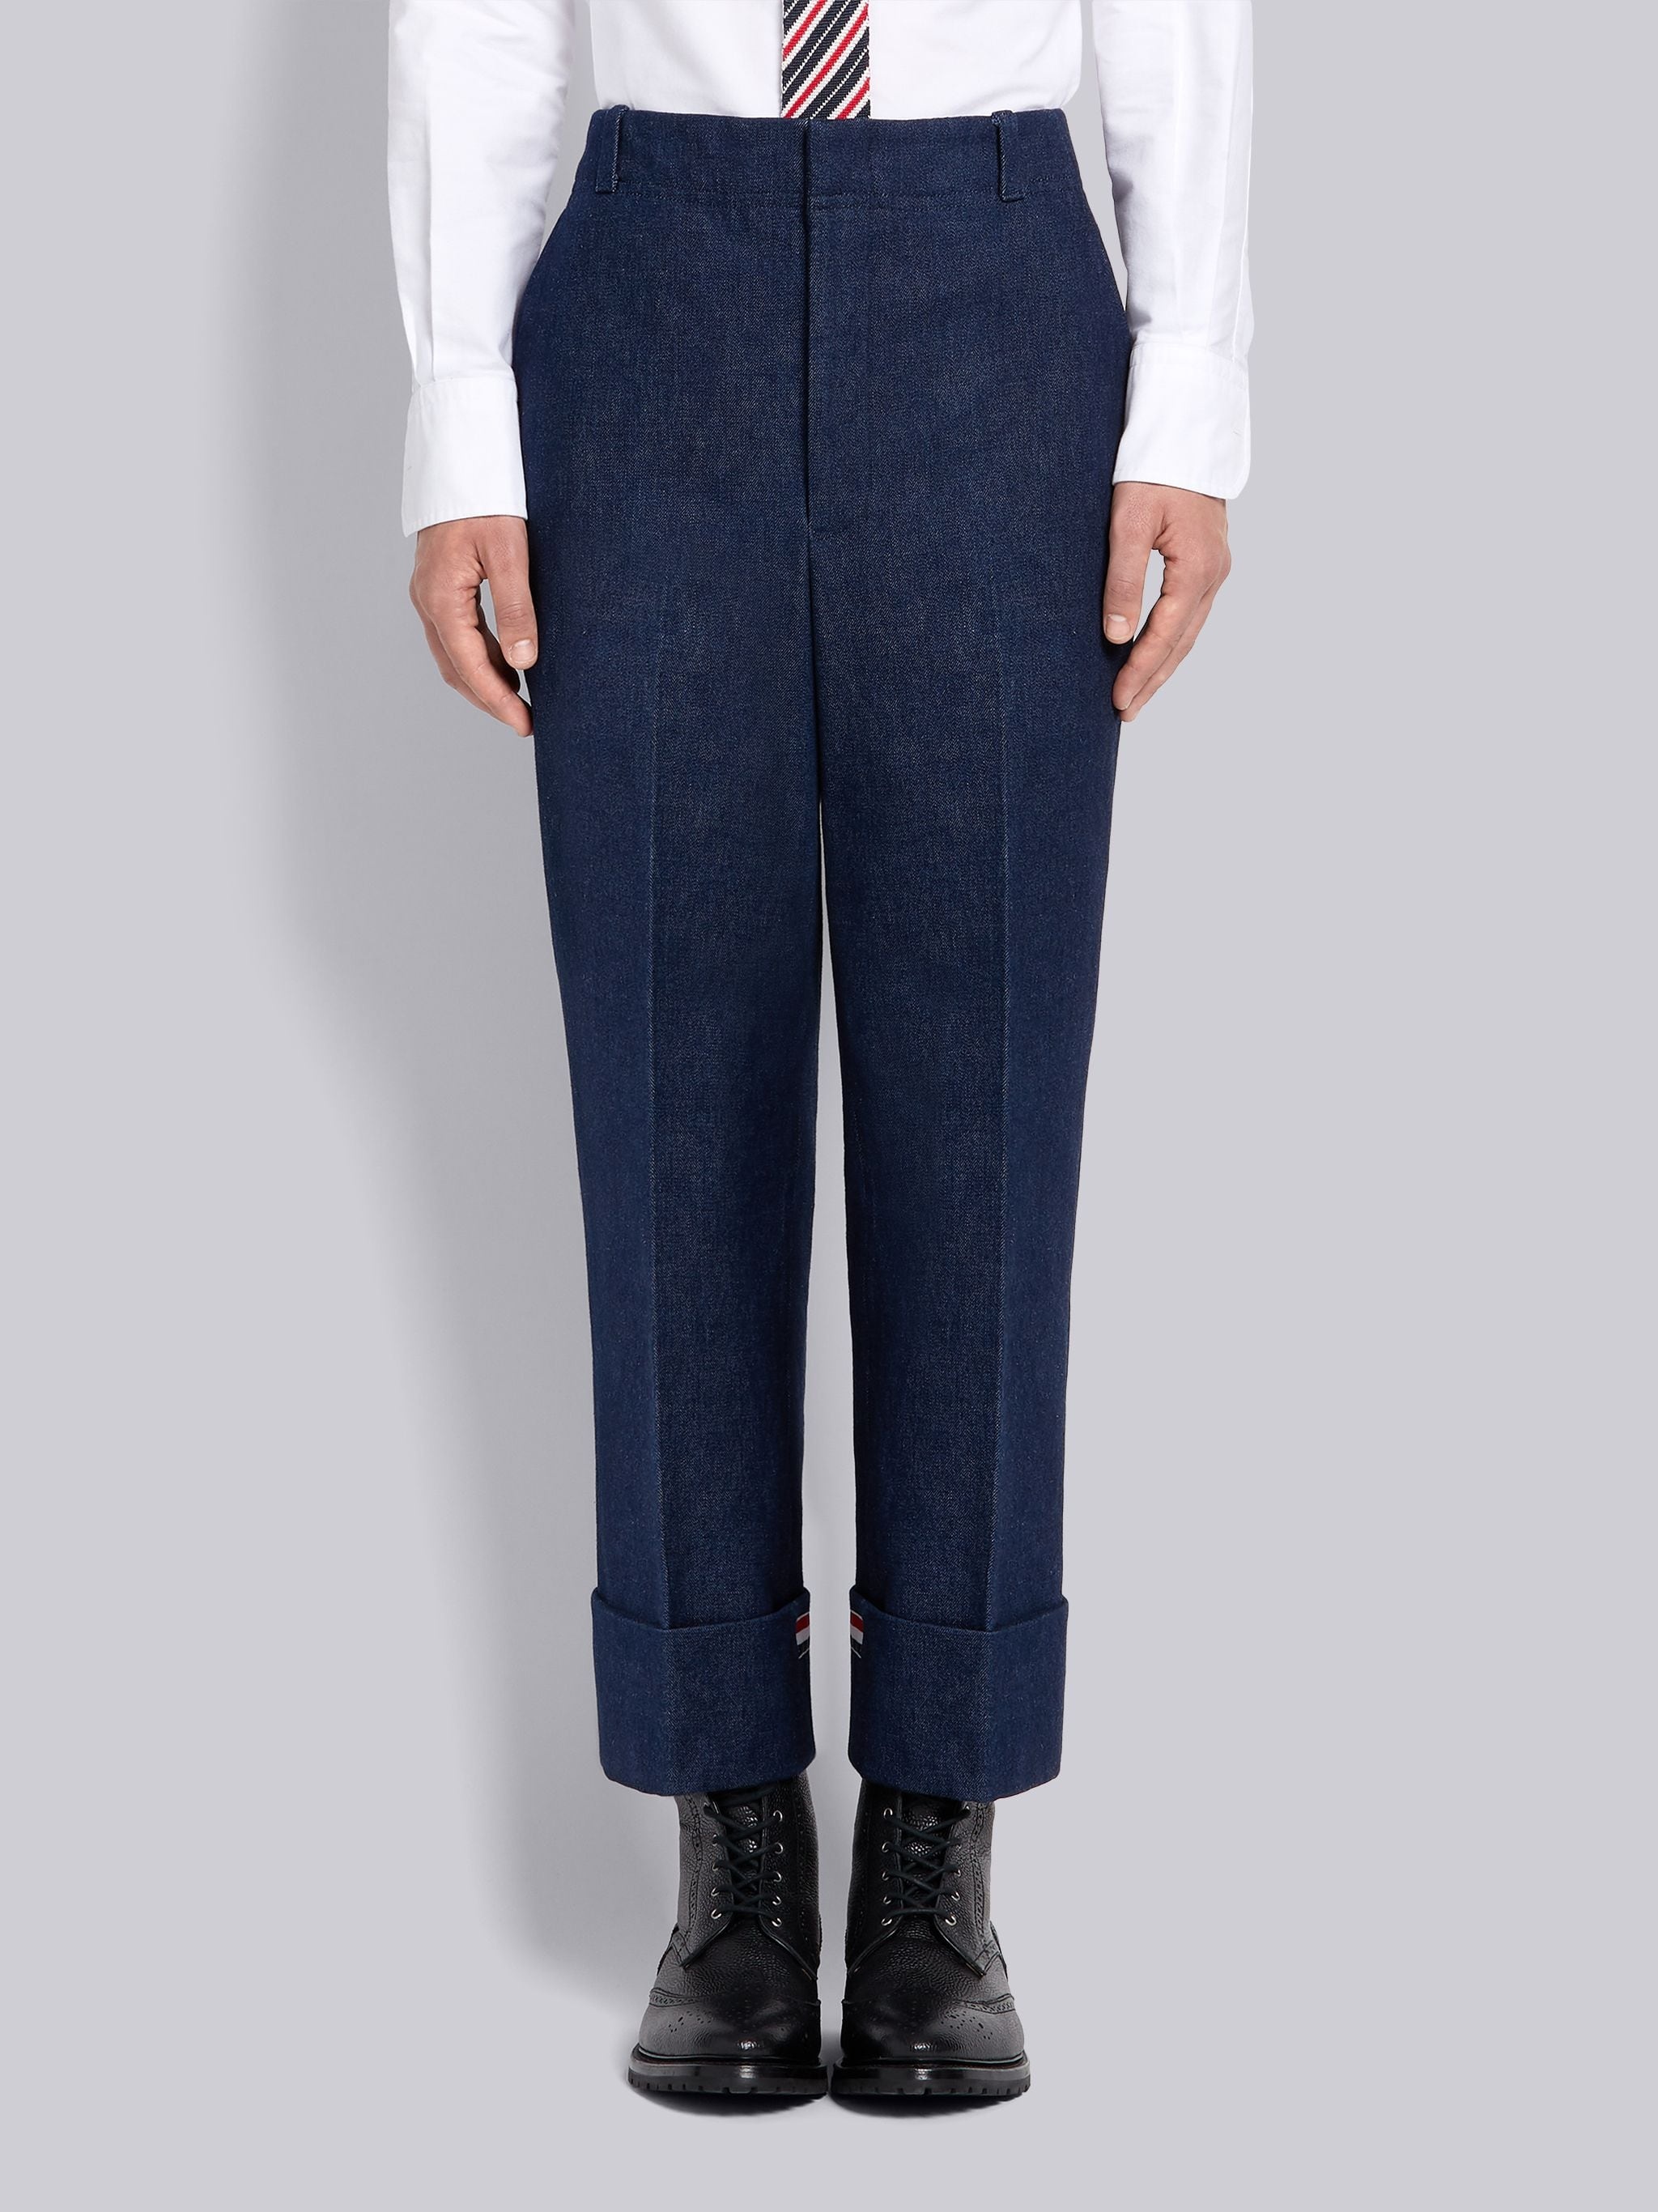 Navy Washed Cotton Denim Deconstructed Cuffed Classic Trouser - 1